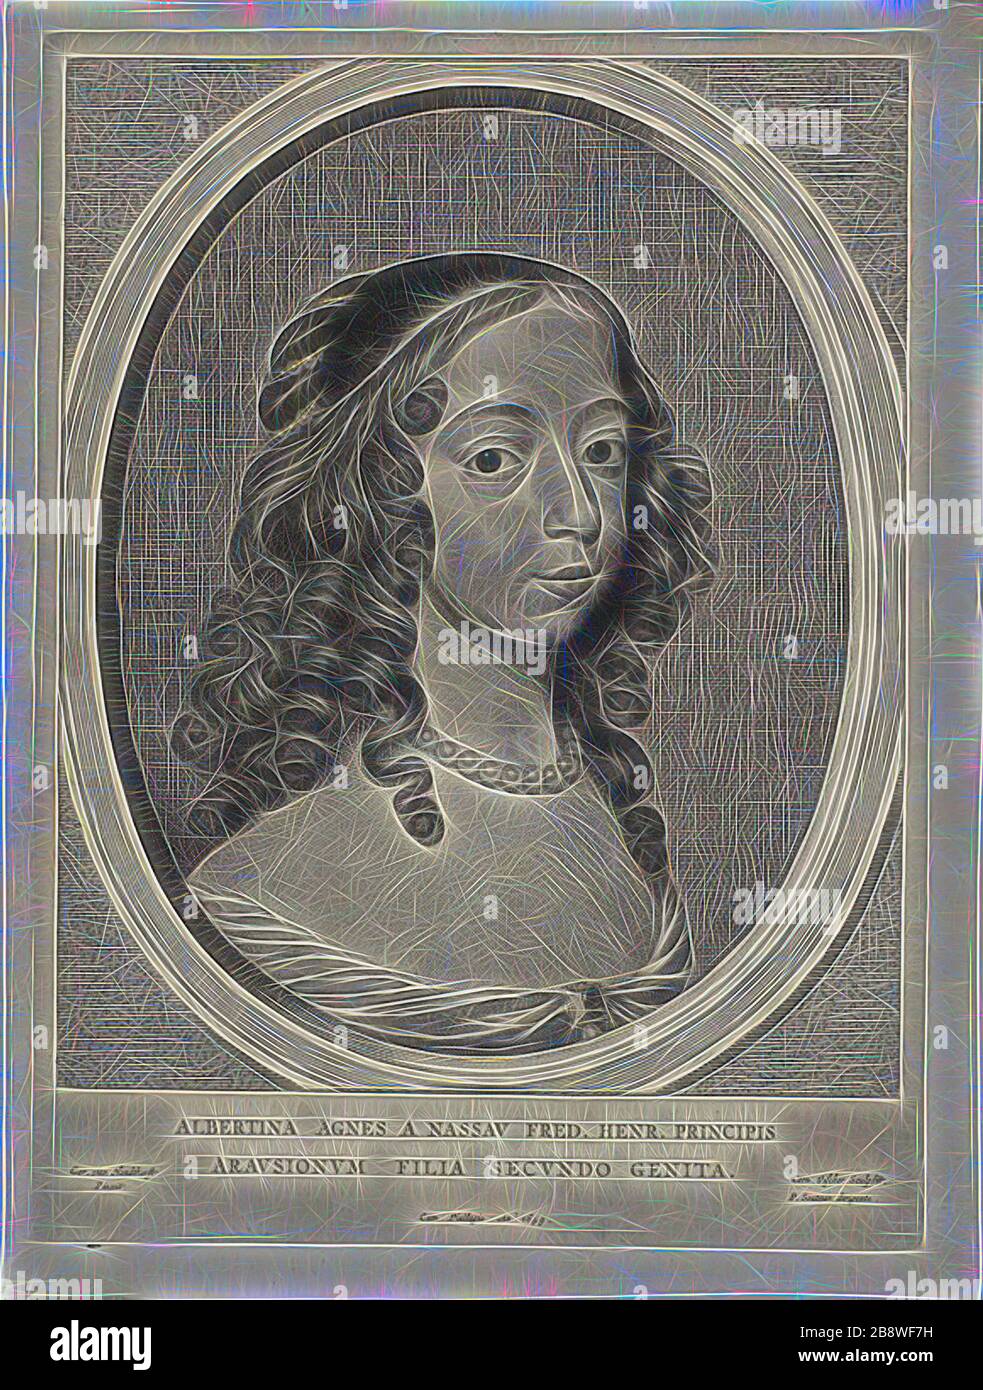 Albertine Agnes of Nassau, n.d., Cornelis Visscher, the Elder (Netherlandish, c. 1520-1586), after Gerrit van Honthorst (Dutch, 1590-1656), Holland, Engraving on paper, 419 x 308 mm, Reimagined by Gibon, design of warm cheerful glowing of brightness and light rays radiance. Classic art reinvented with a modern twist. Photography inspired by futurism, embracing dynamic energy of modern technology, movement, speed and revolutionize culture. Stock Photo